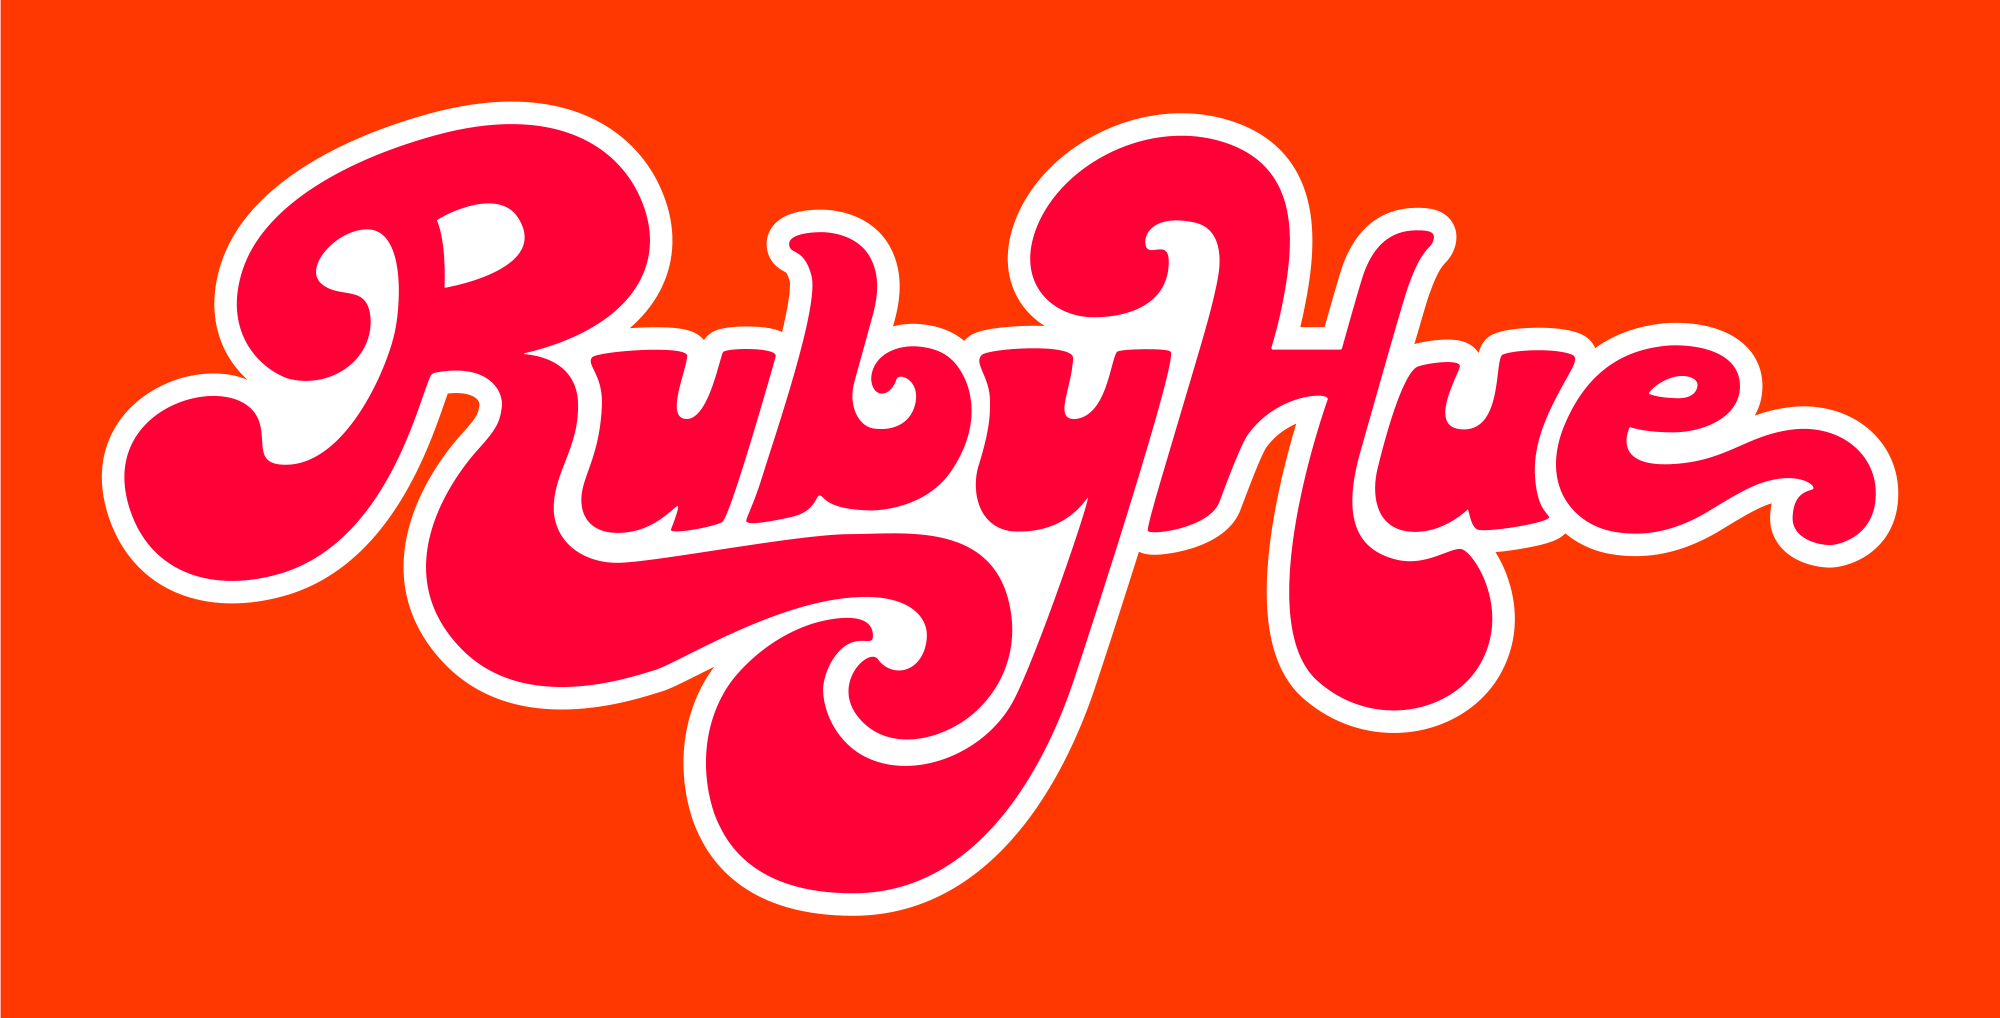 RubyHue_Identity03a.png